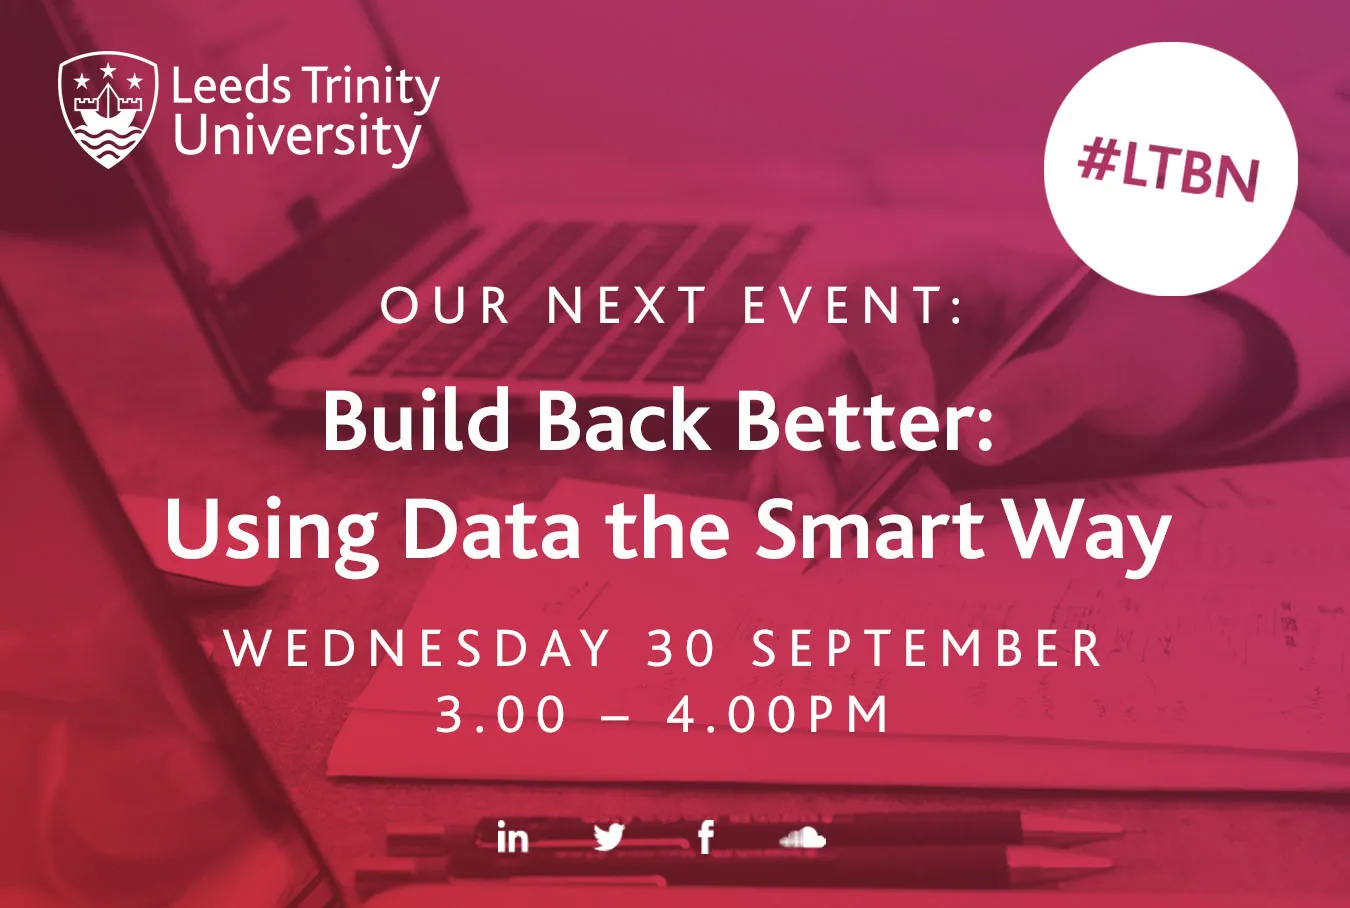 Build Back Better: using Data the Smart Way Wednesday 30 September on a light purple background with social media icons.